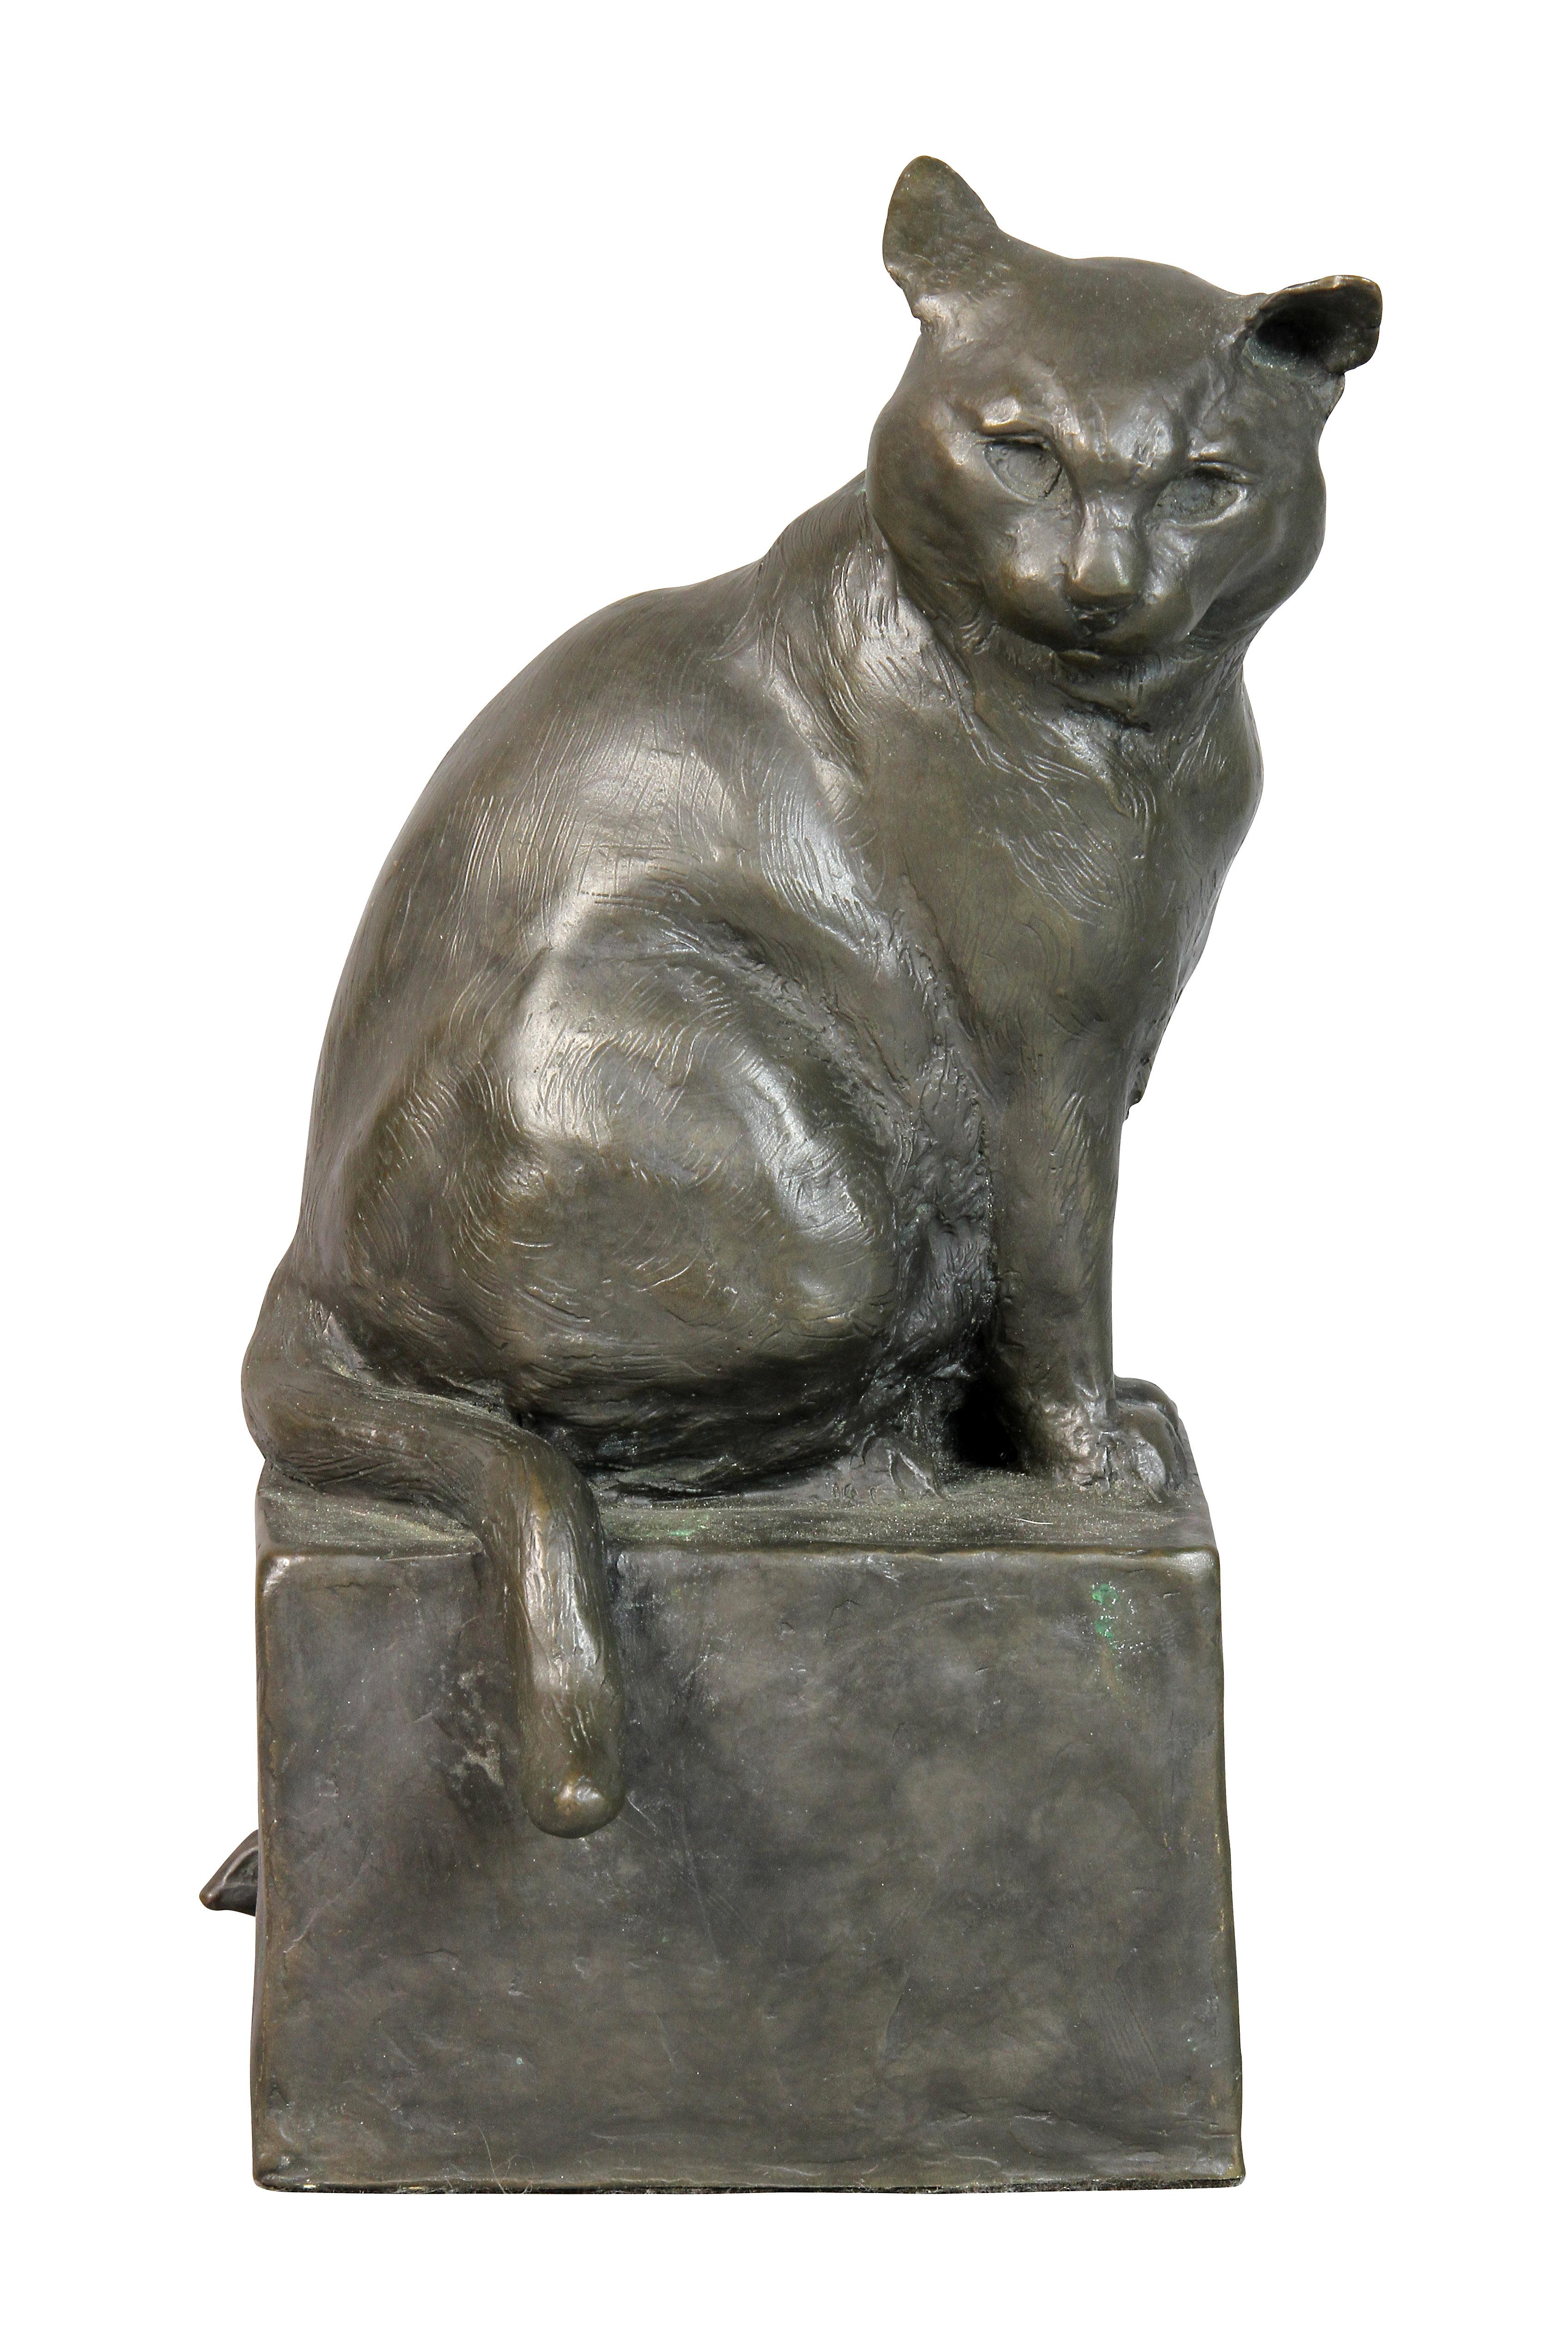 Seated cat with a mouse hiding by the base. Signed EM Leary 9 of 15.